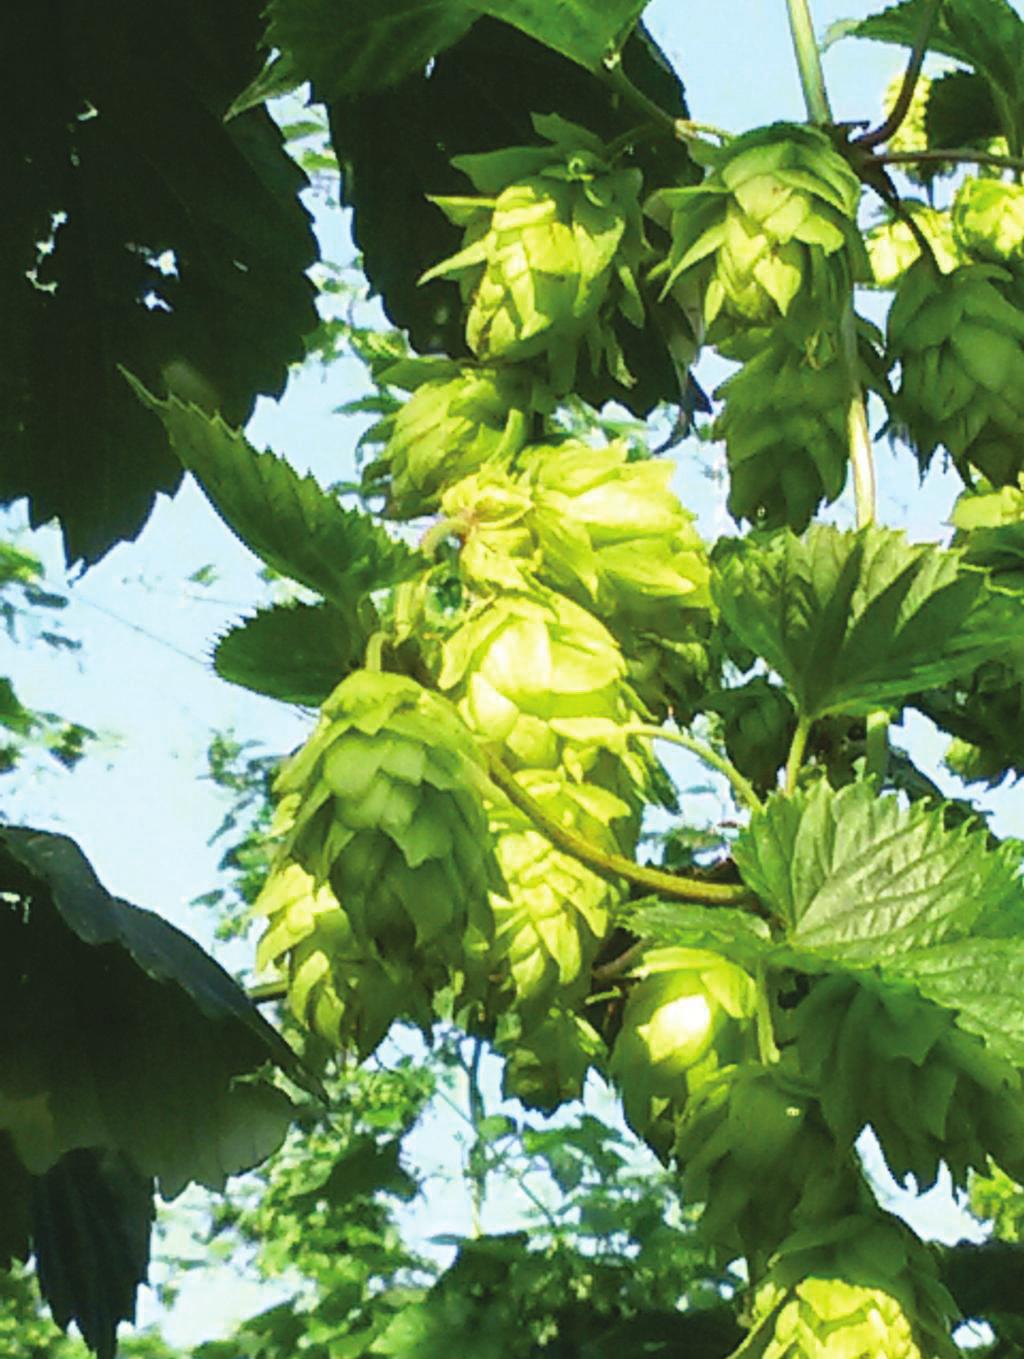 July 25 2014 USA Hops At the beginning of July, ten days after our last Letter, the crop in Yakima was starting to look a bit behind with expectations of an average yield, but fast forward up to